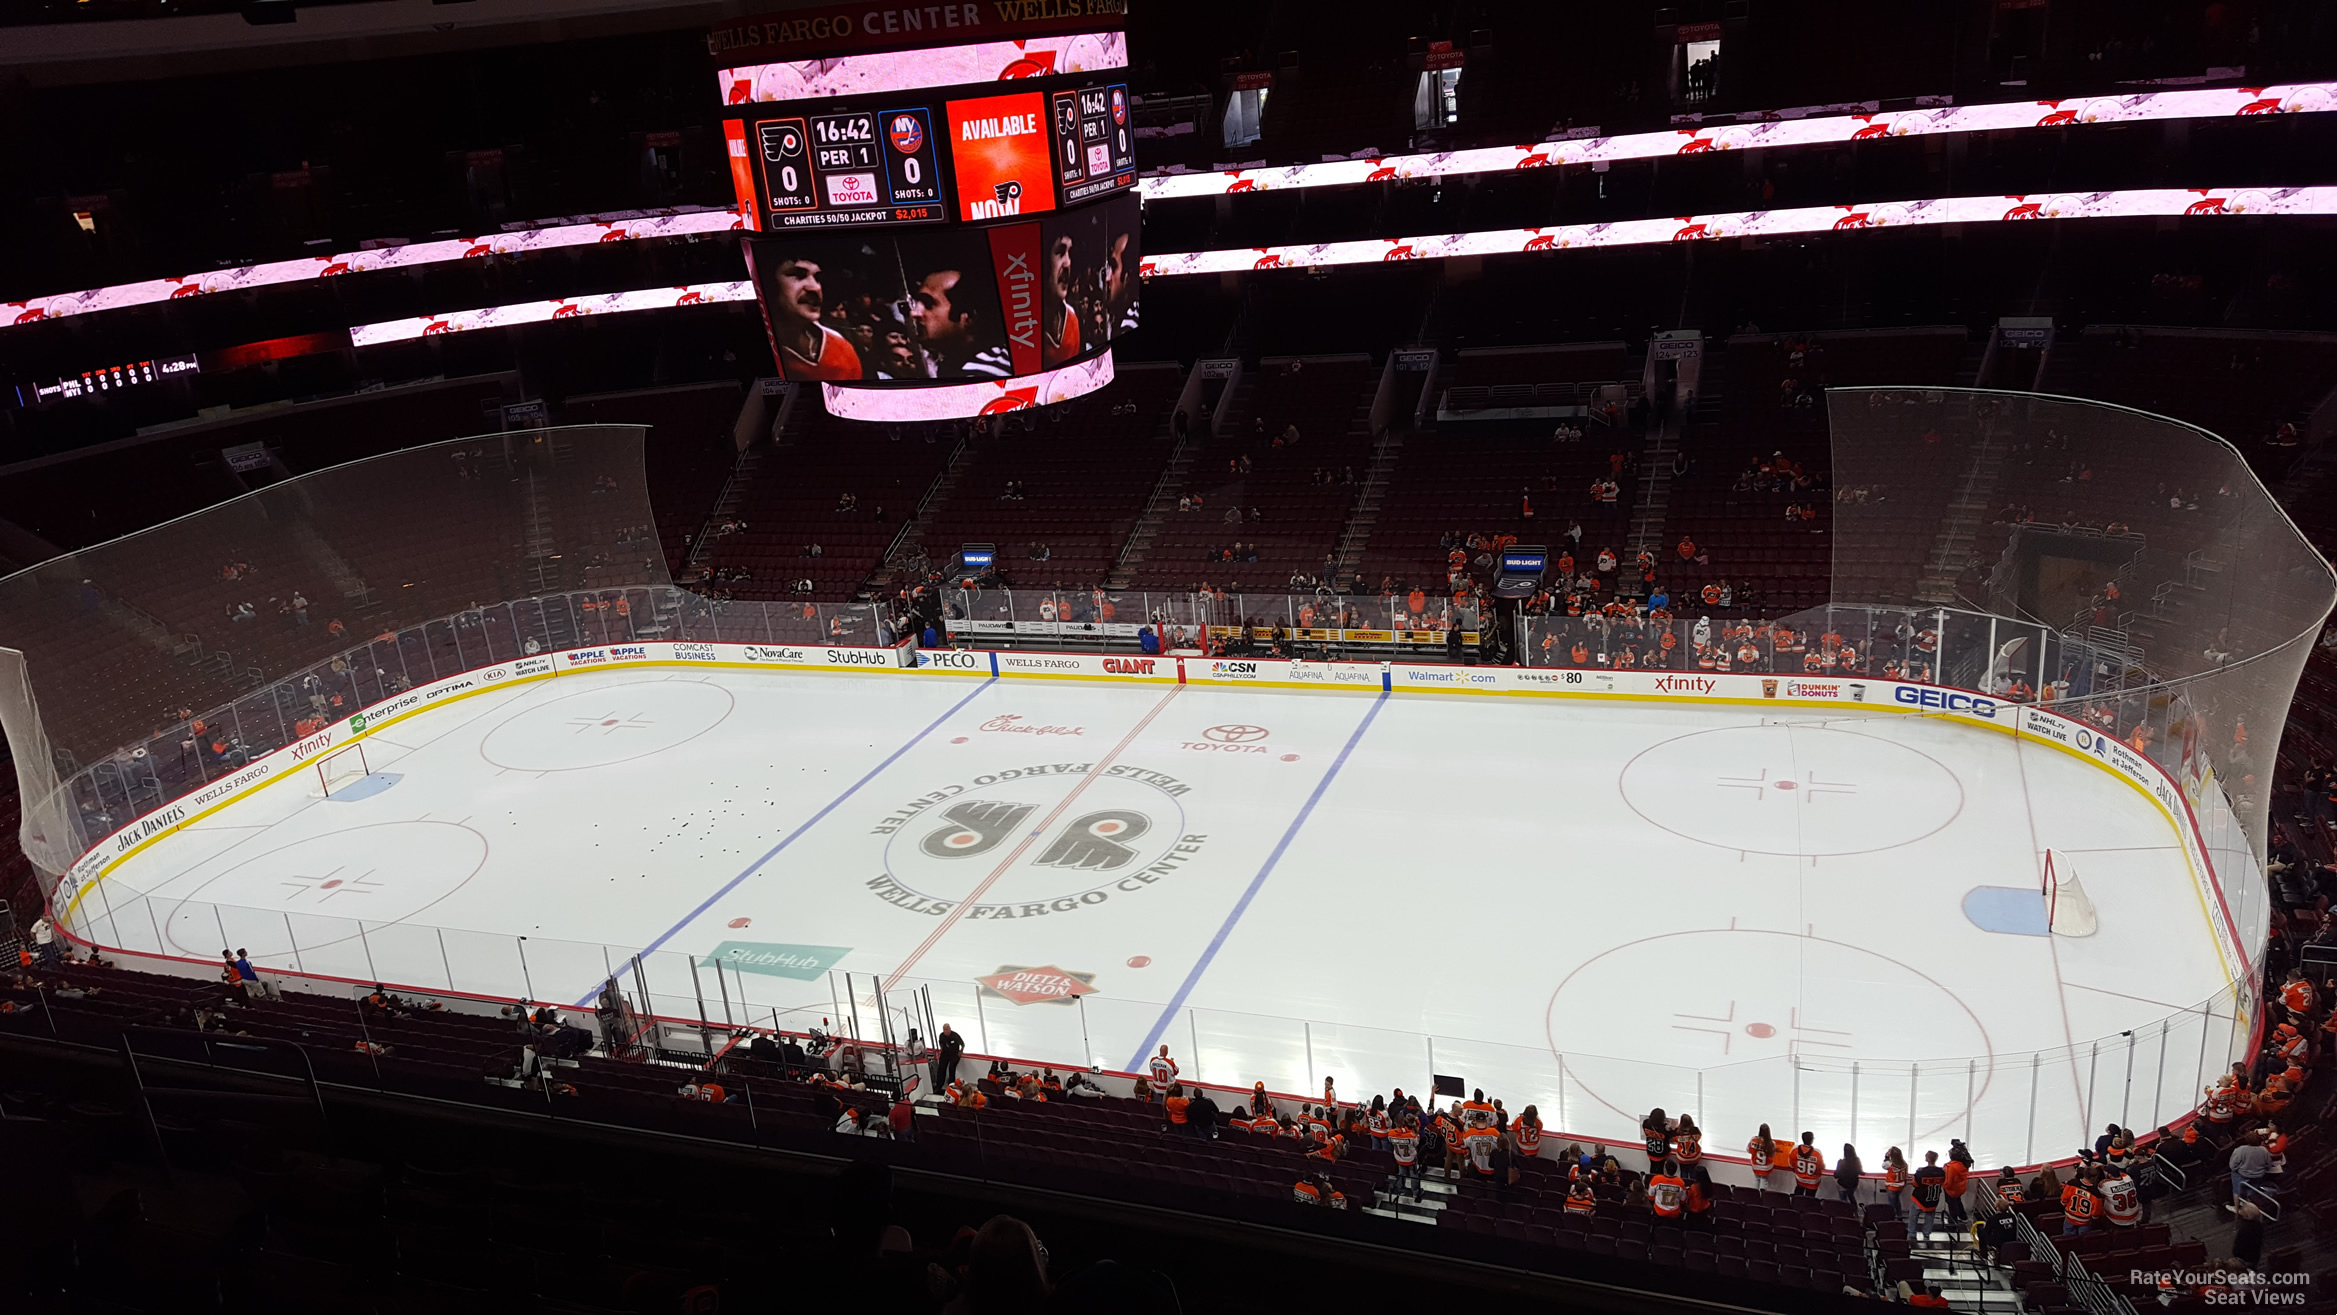 section 215, row 8 seat view  for hockey - wells fargo center